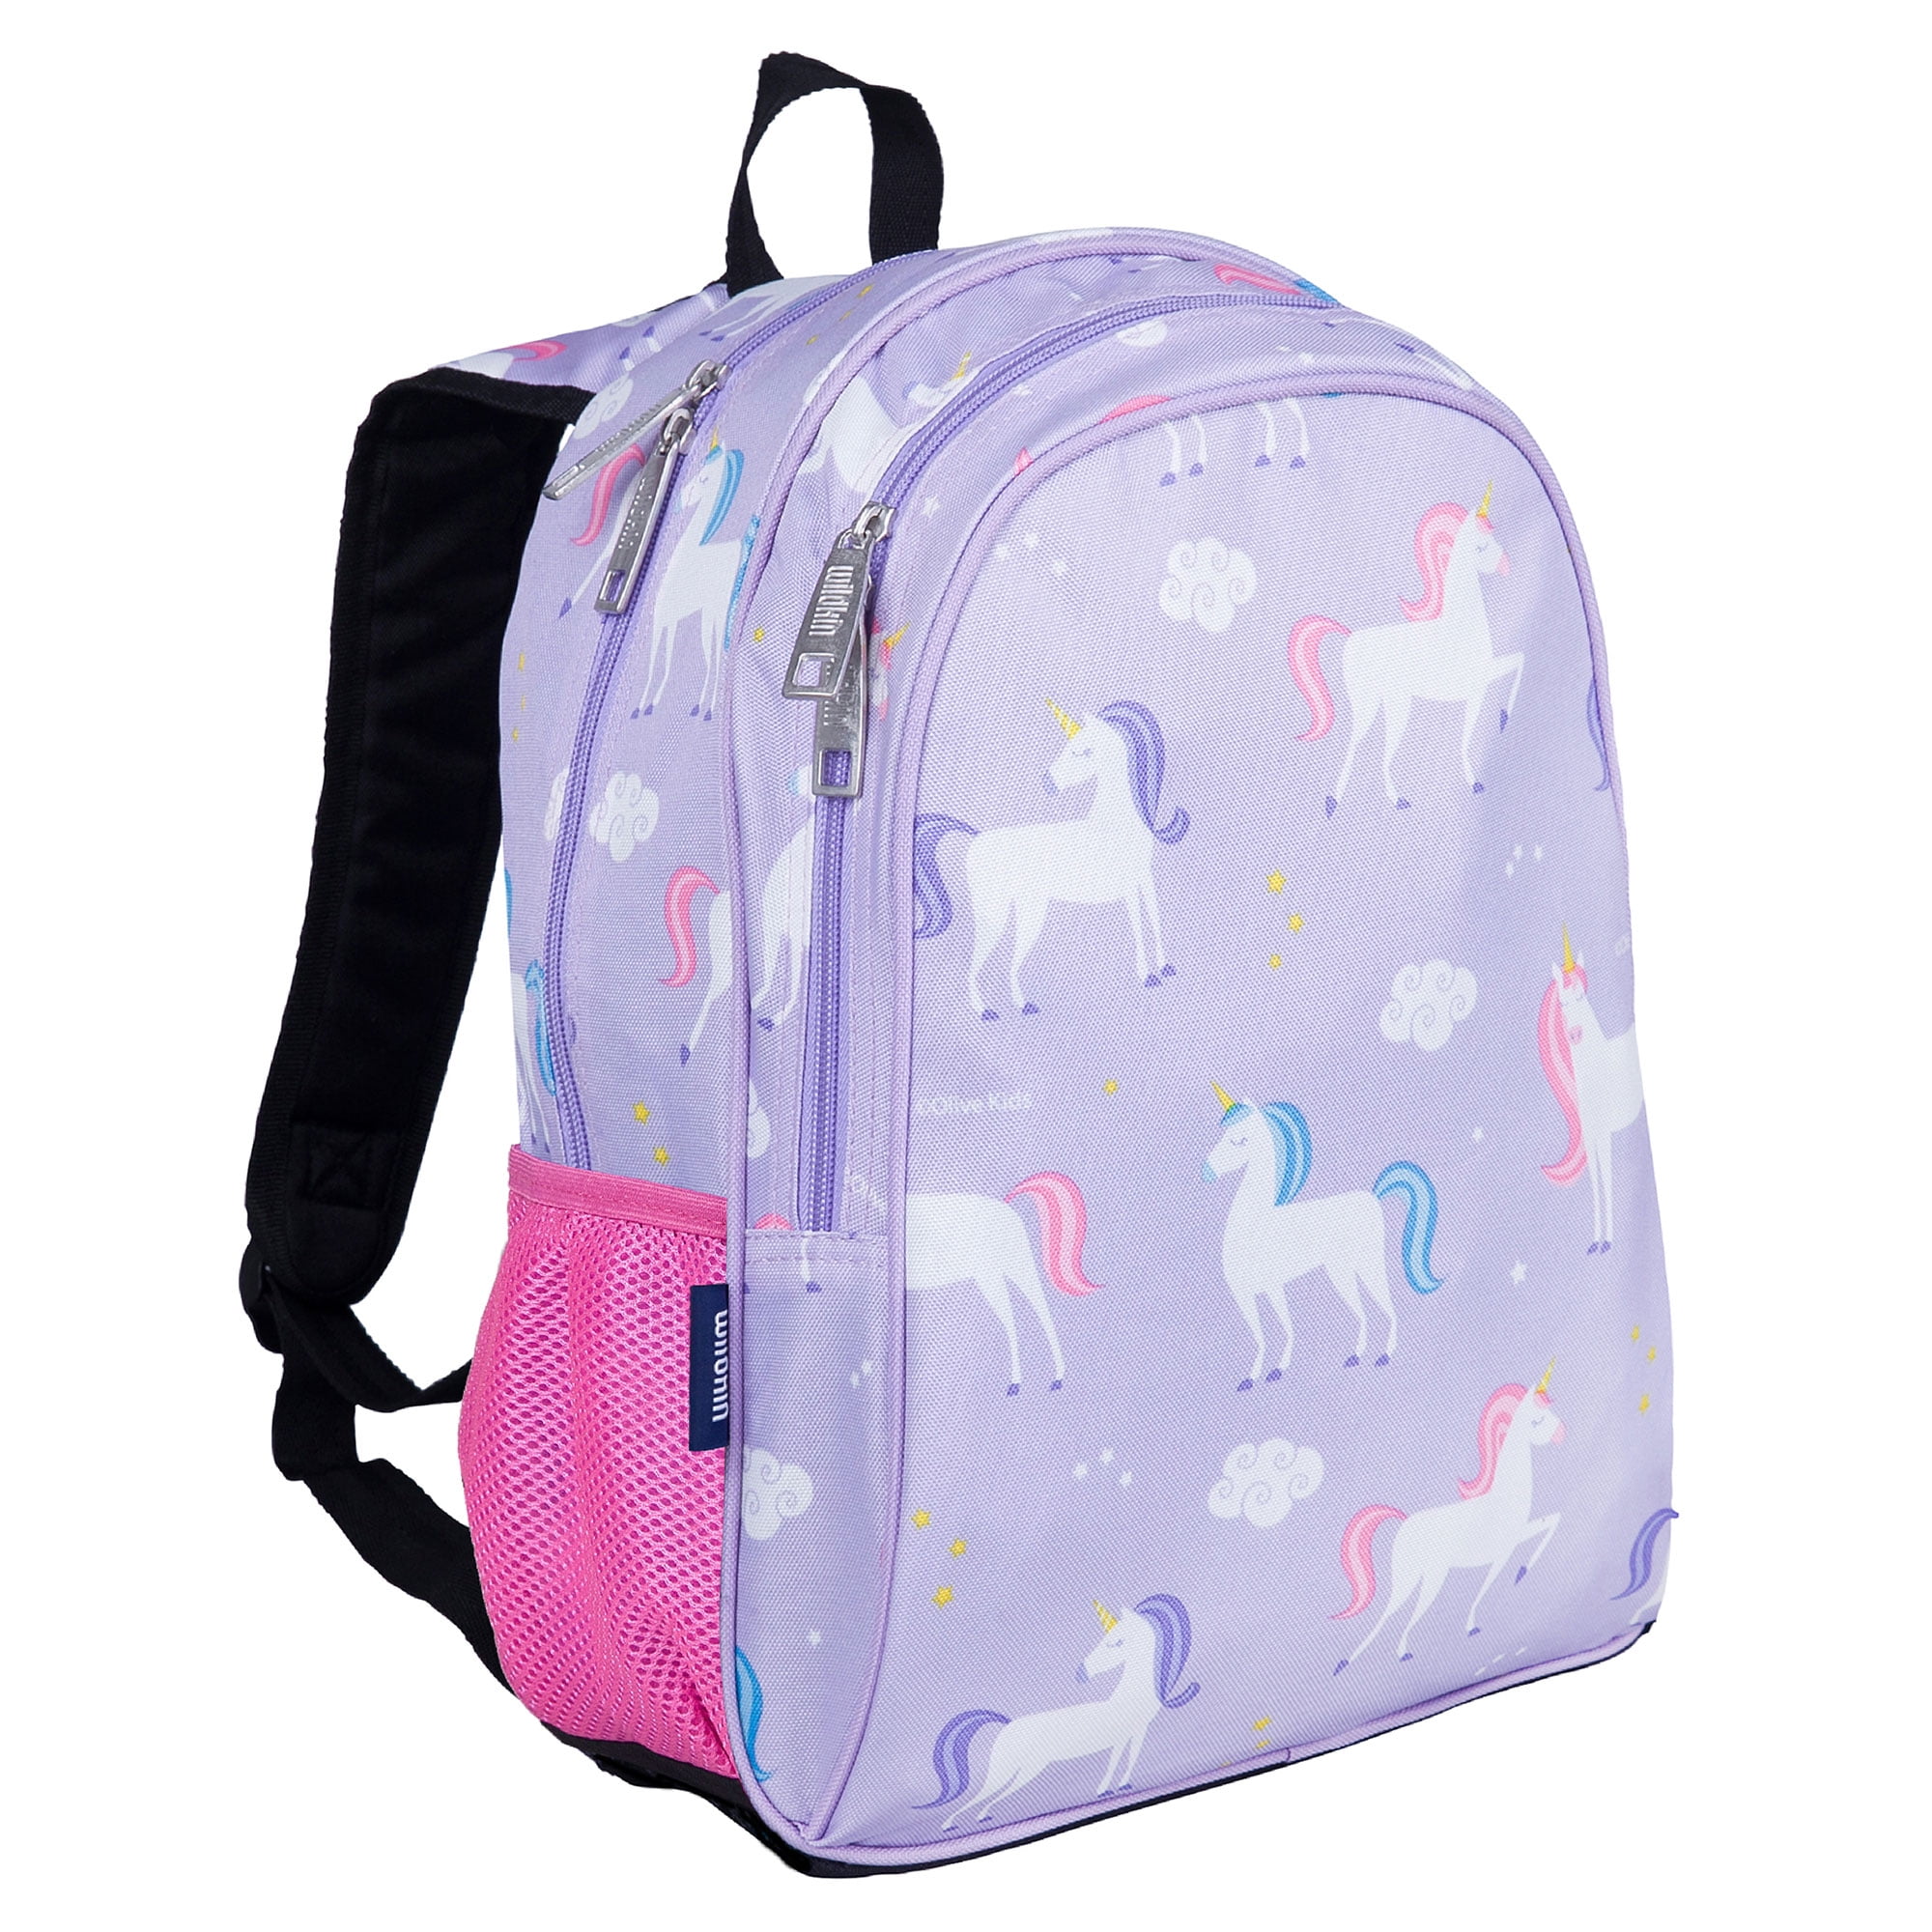 Wildkin Kids 15 Inch School and Travel Backpack for Boys and Girls (Unicorn  Purple) 